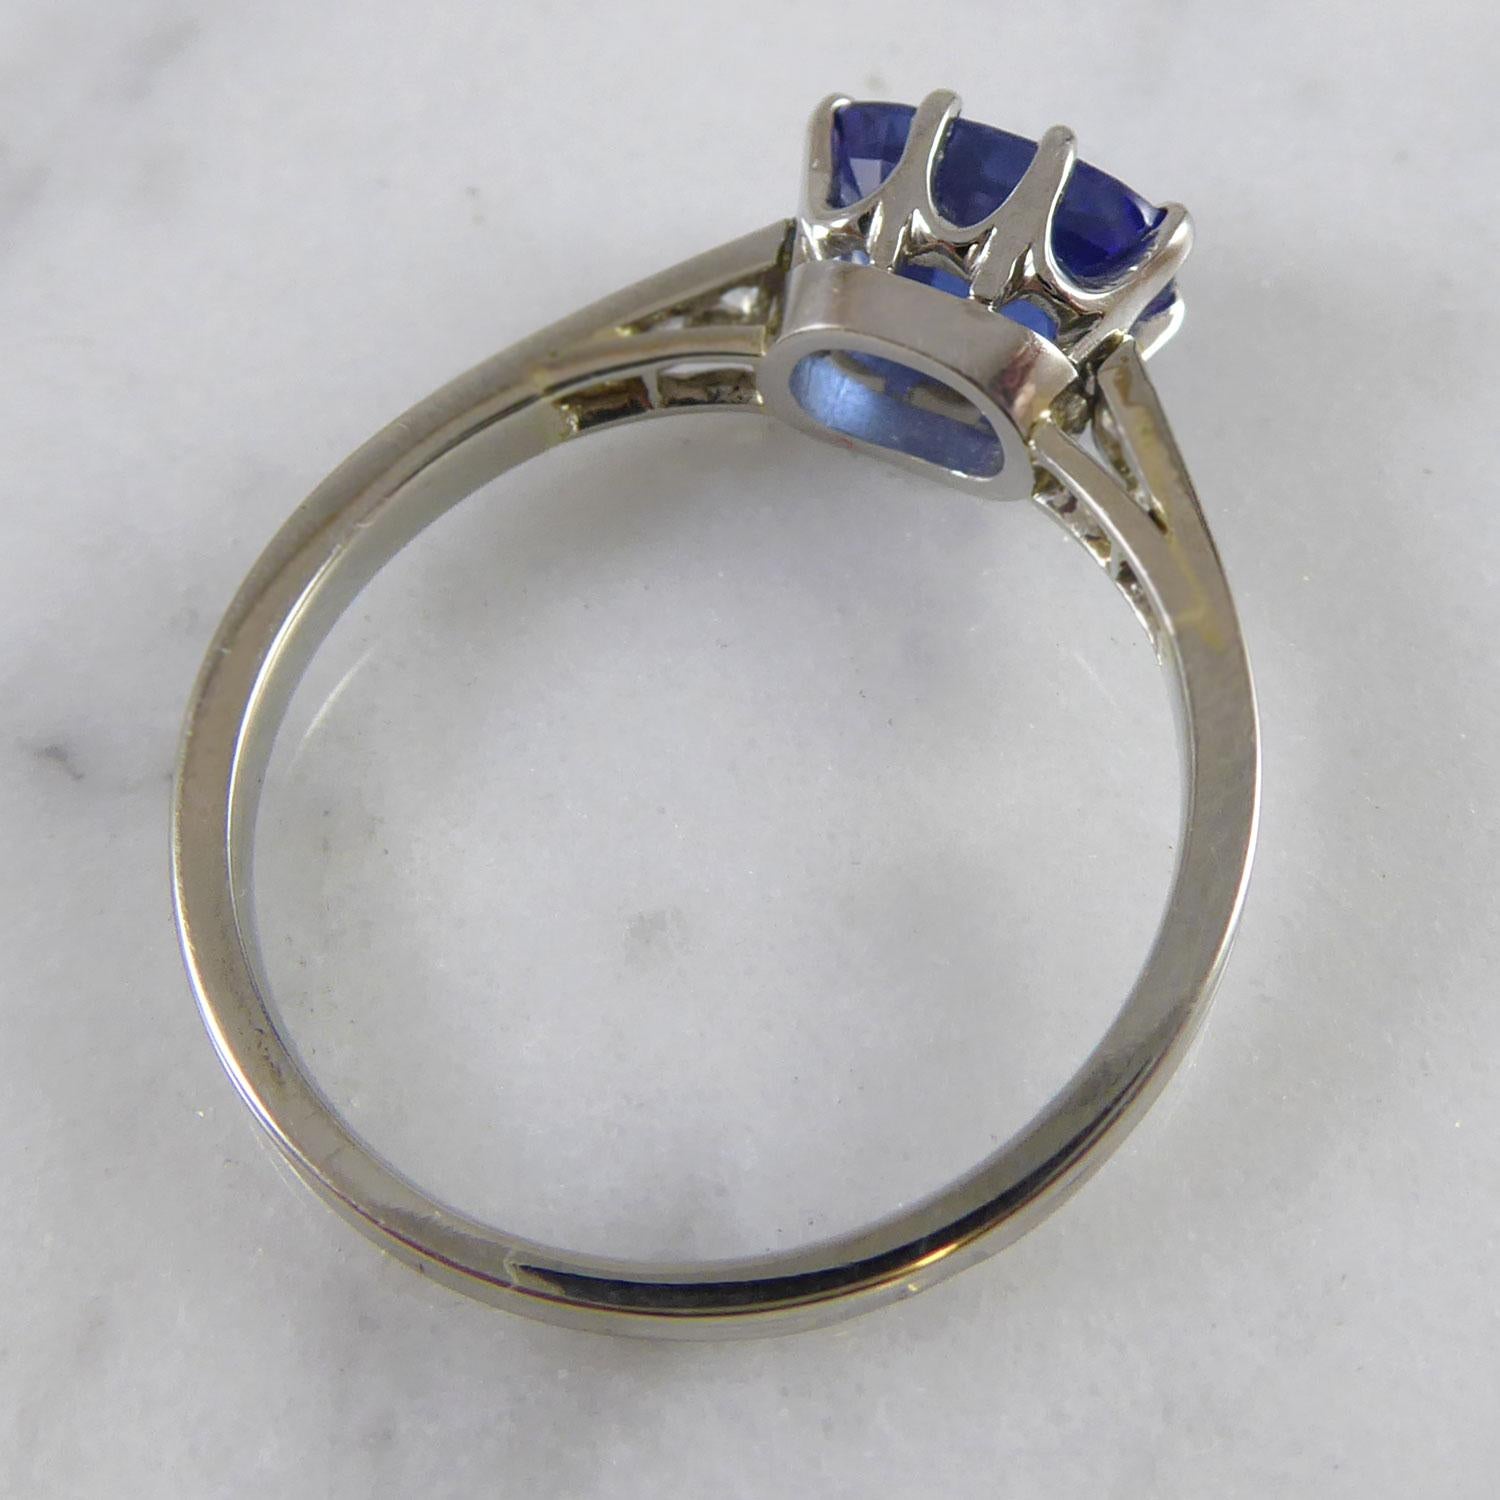 Women's Contemporary 1.41 Carat Sapphire Ring with Diamond Set Shoulders, French